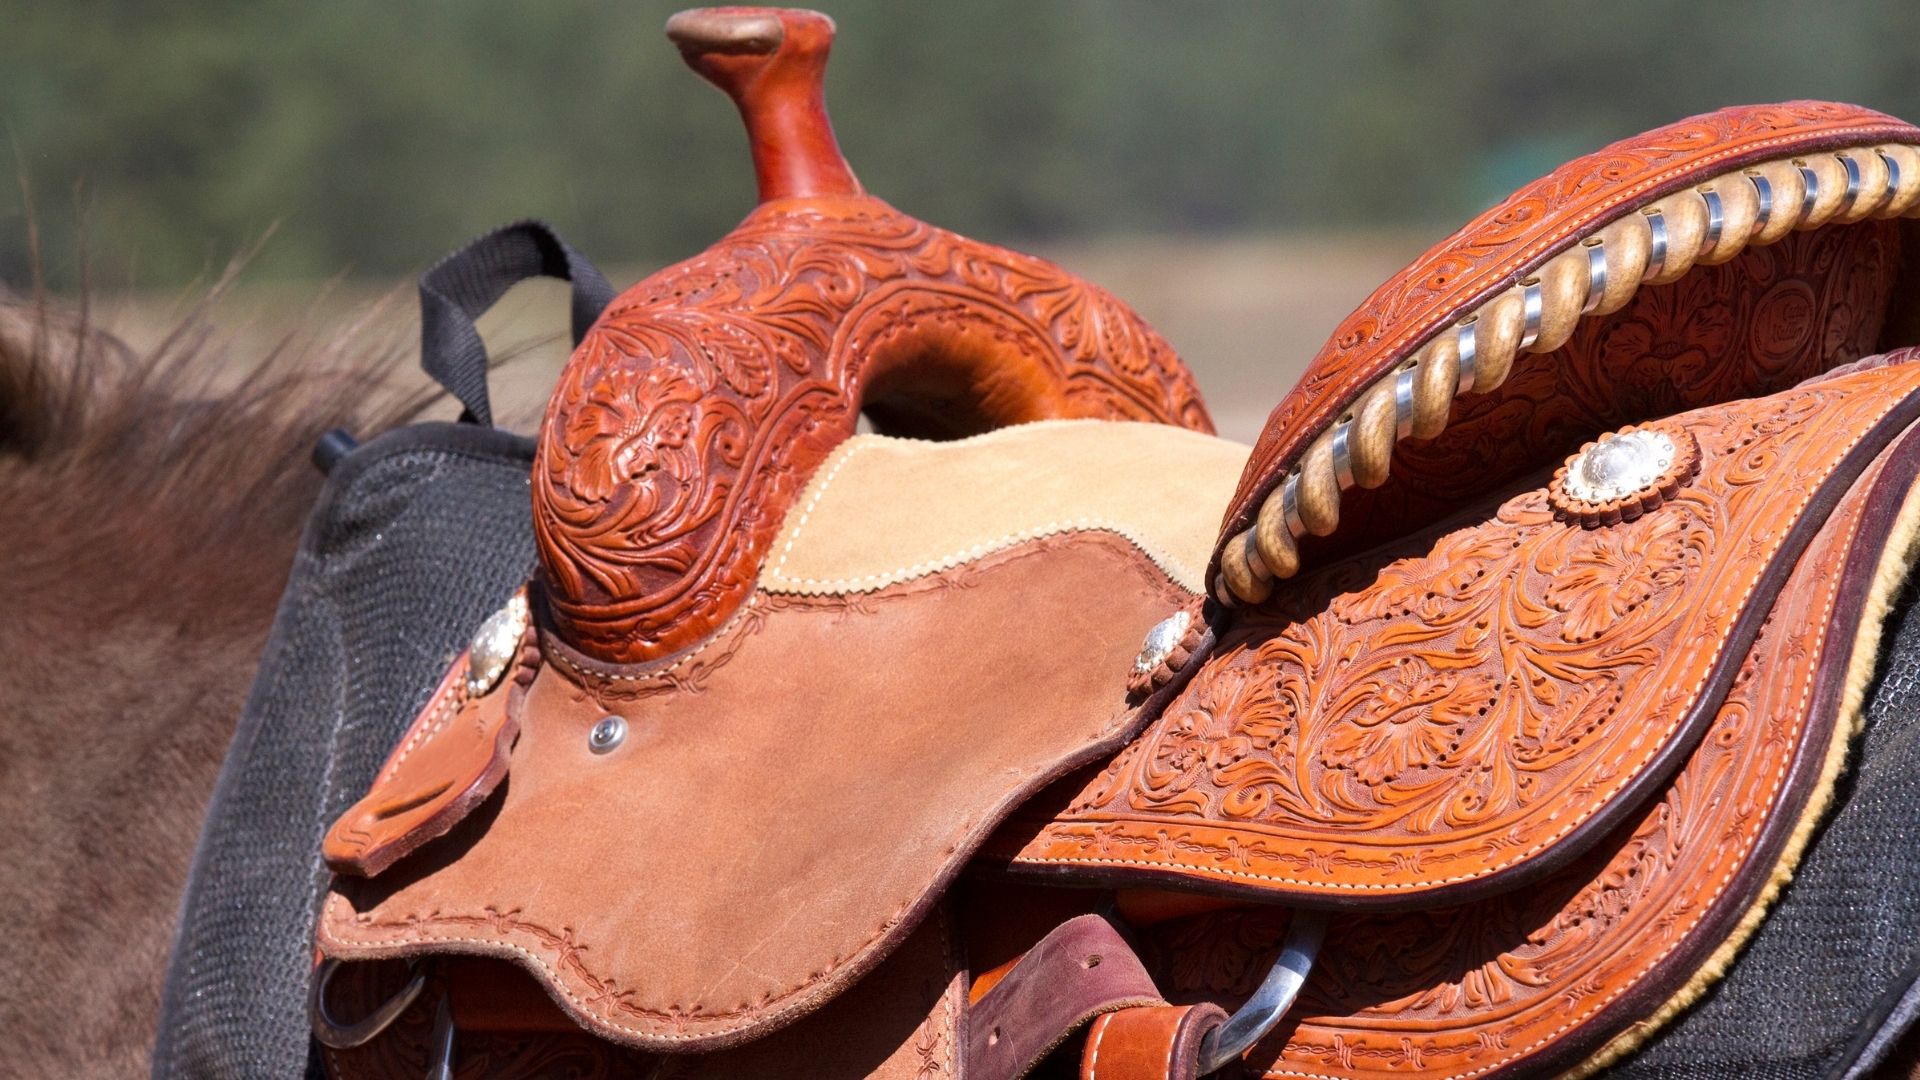 What is Western tack used for?